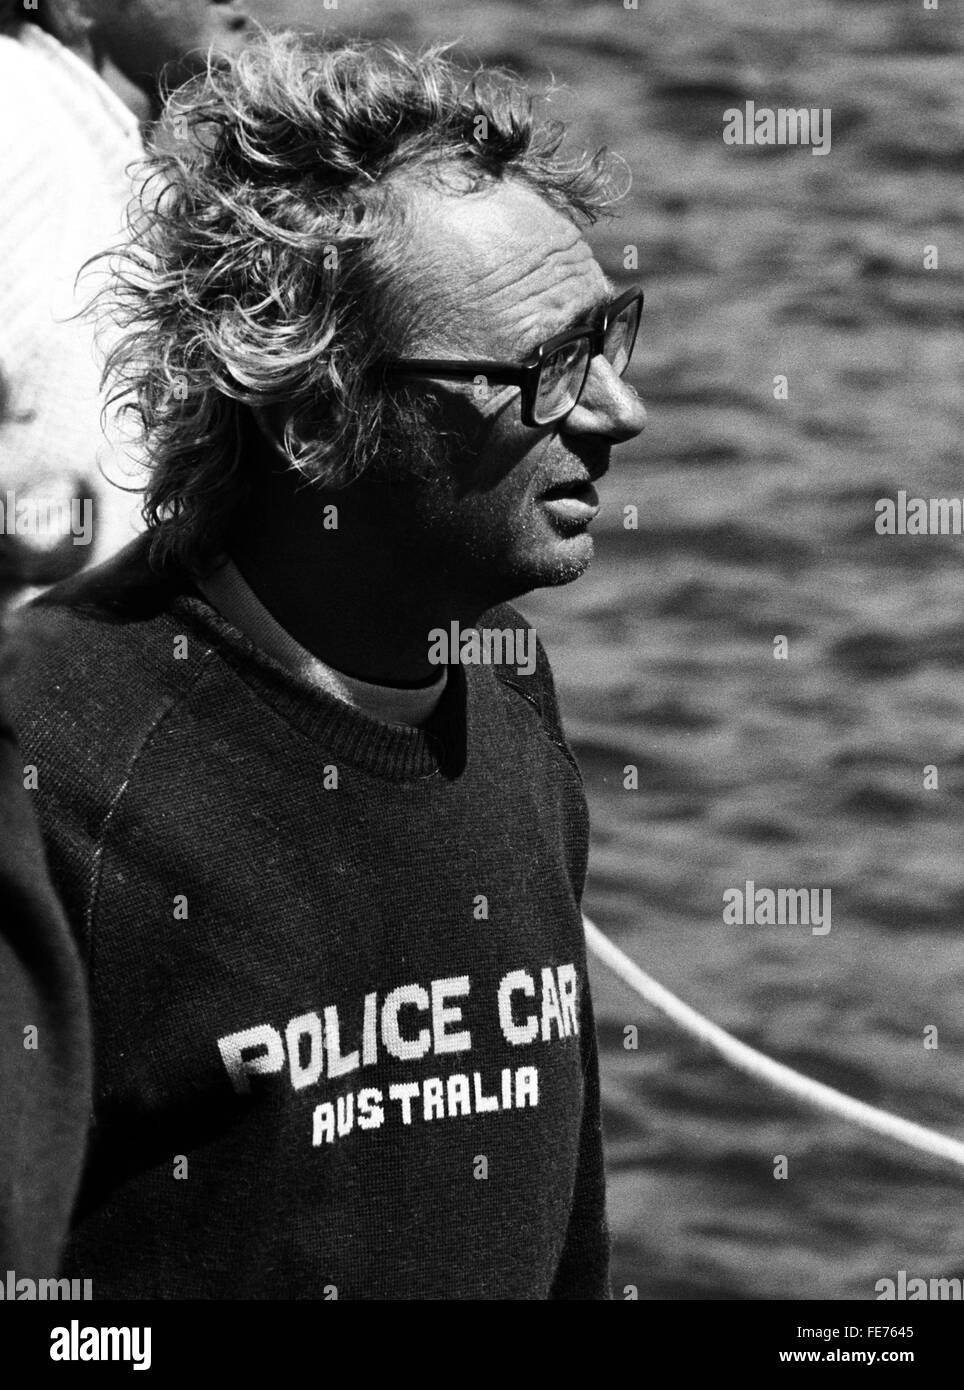 AJAXNETPHOTO - 16th August, 1979. PLYMOUTH, ENGLAND - FASTNET RACE - PETER CANTWELL (AUS), SKIPPER OF POLICE CAR ON ARRIVAL IN MILBAY DOCK.  PHOTO:JONATHAN EASTLAND/AJAX REF: 791608 1 Stock Photo